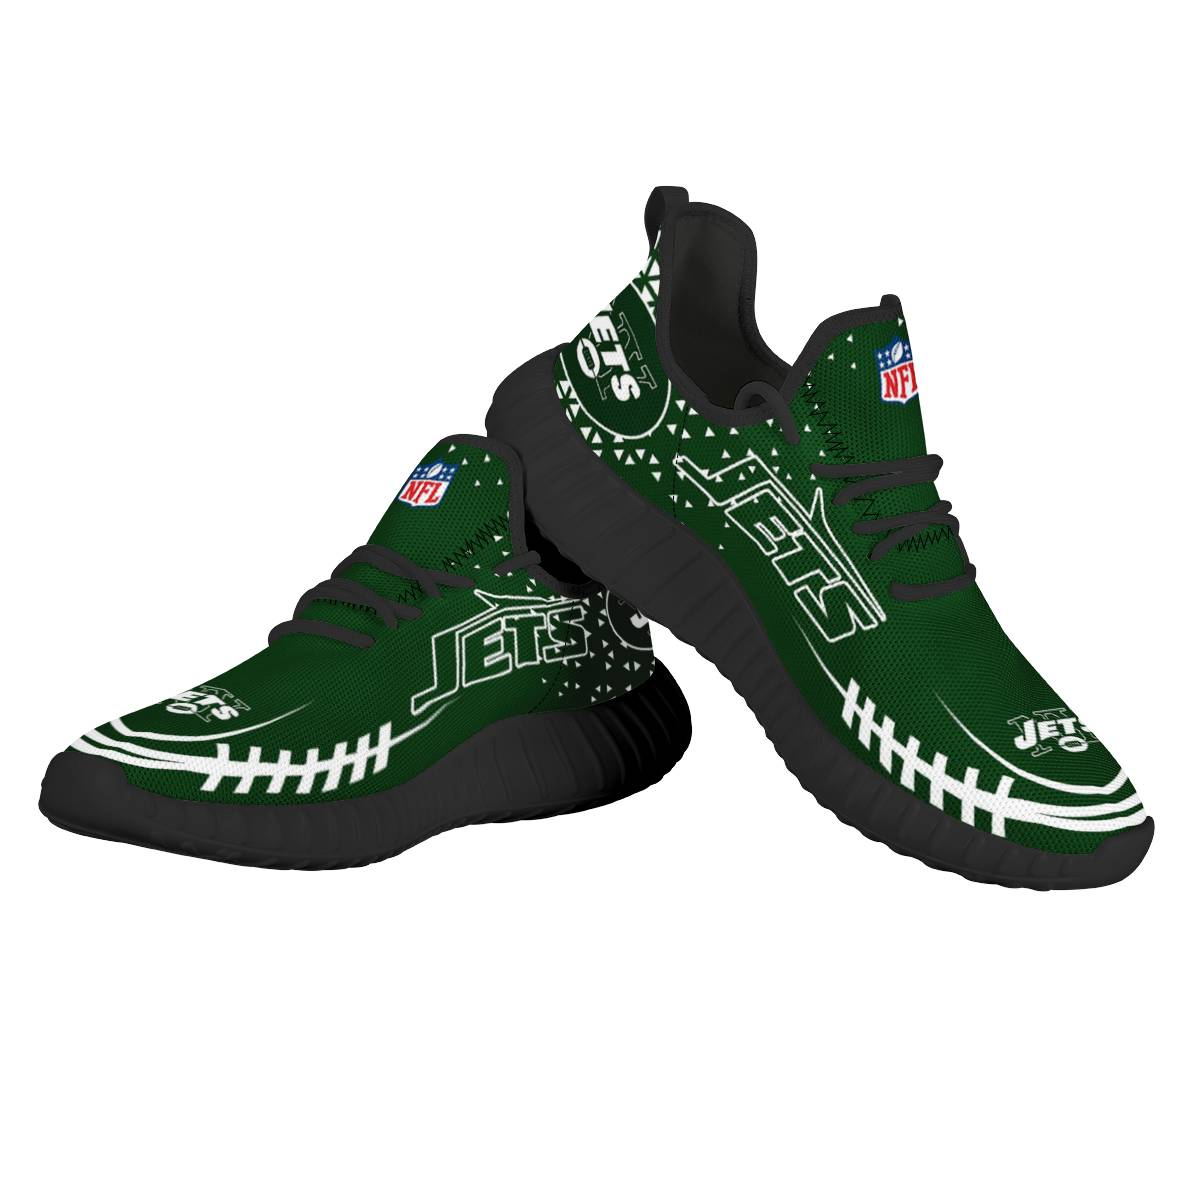 Women's NFL New York Jets Mesh Knit Sneakers/Shoes 003